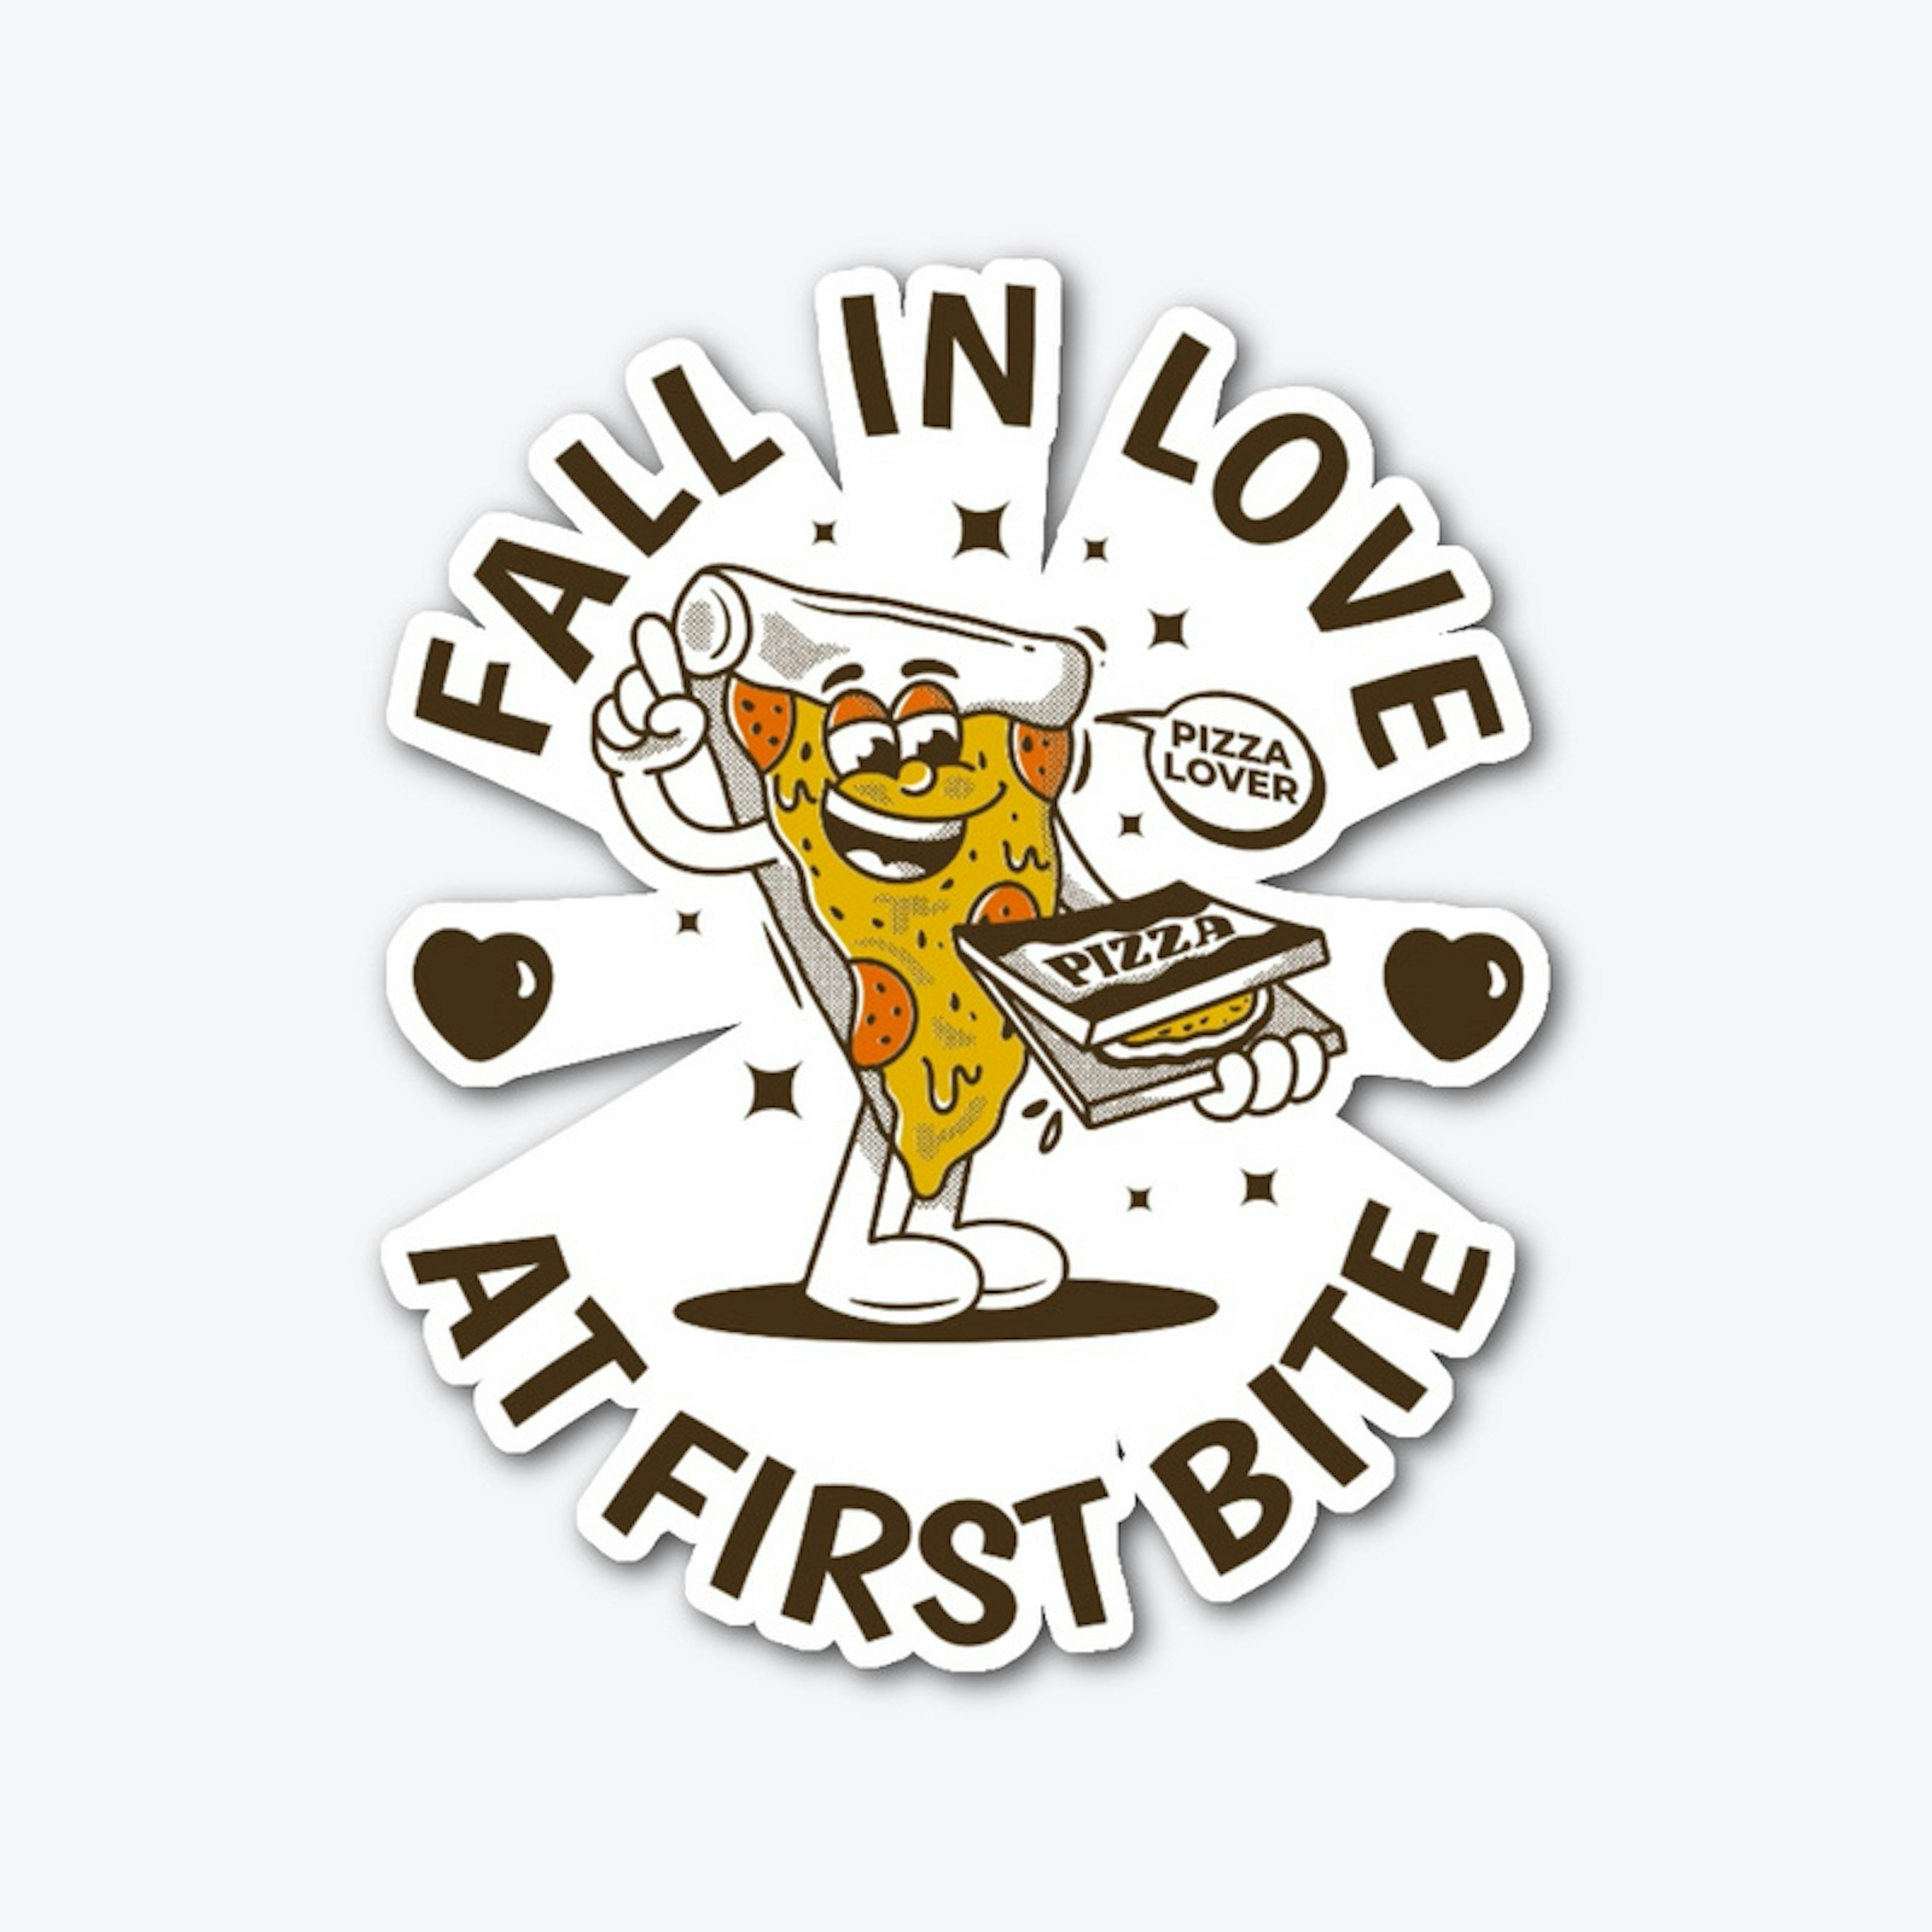 Fall in love at first bite